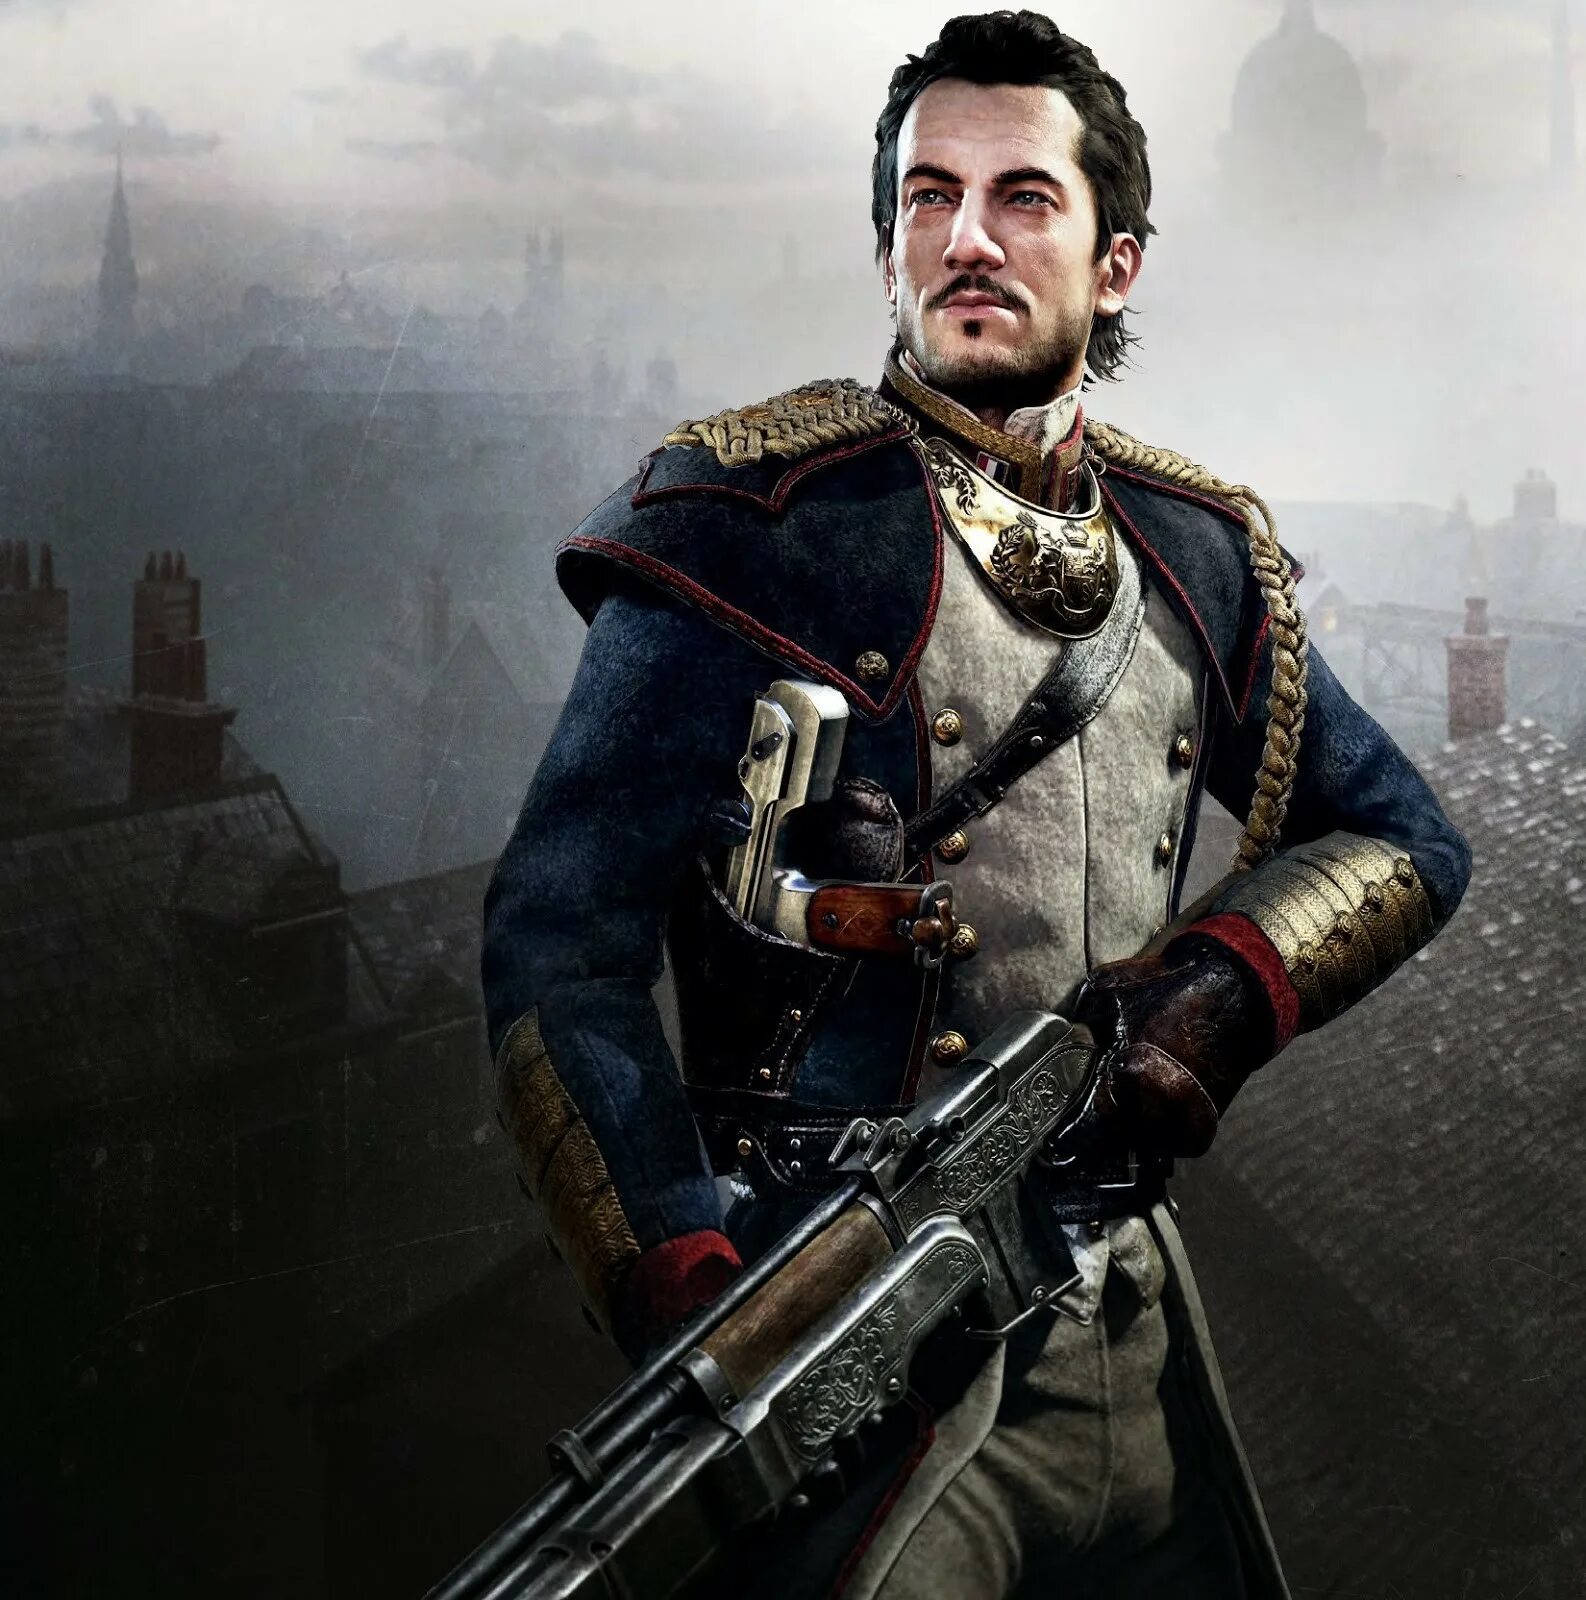 Ps4 1886. The order: 1886. The order 1886 Лафайет. Игра ордер 1886. The order 1886 Галахад.